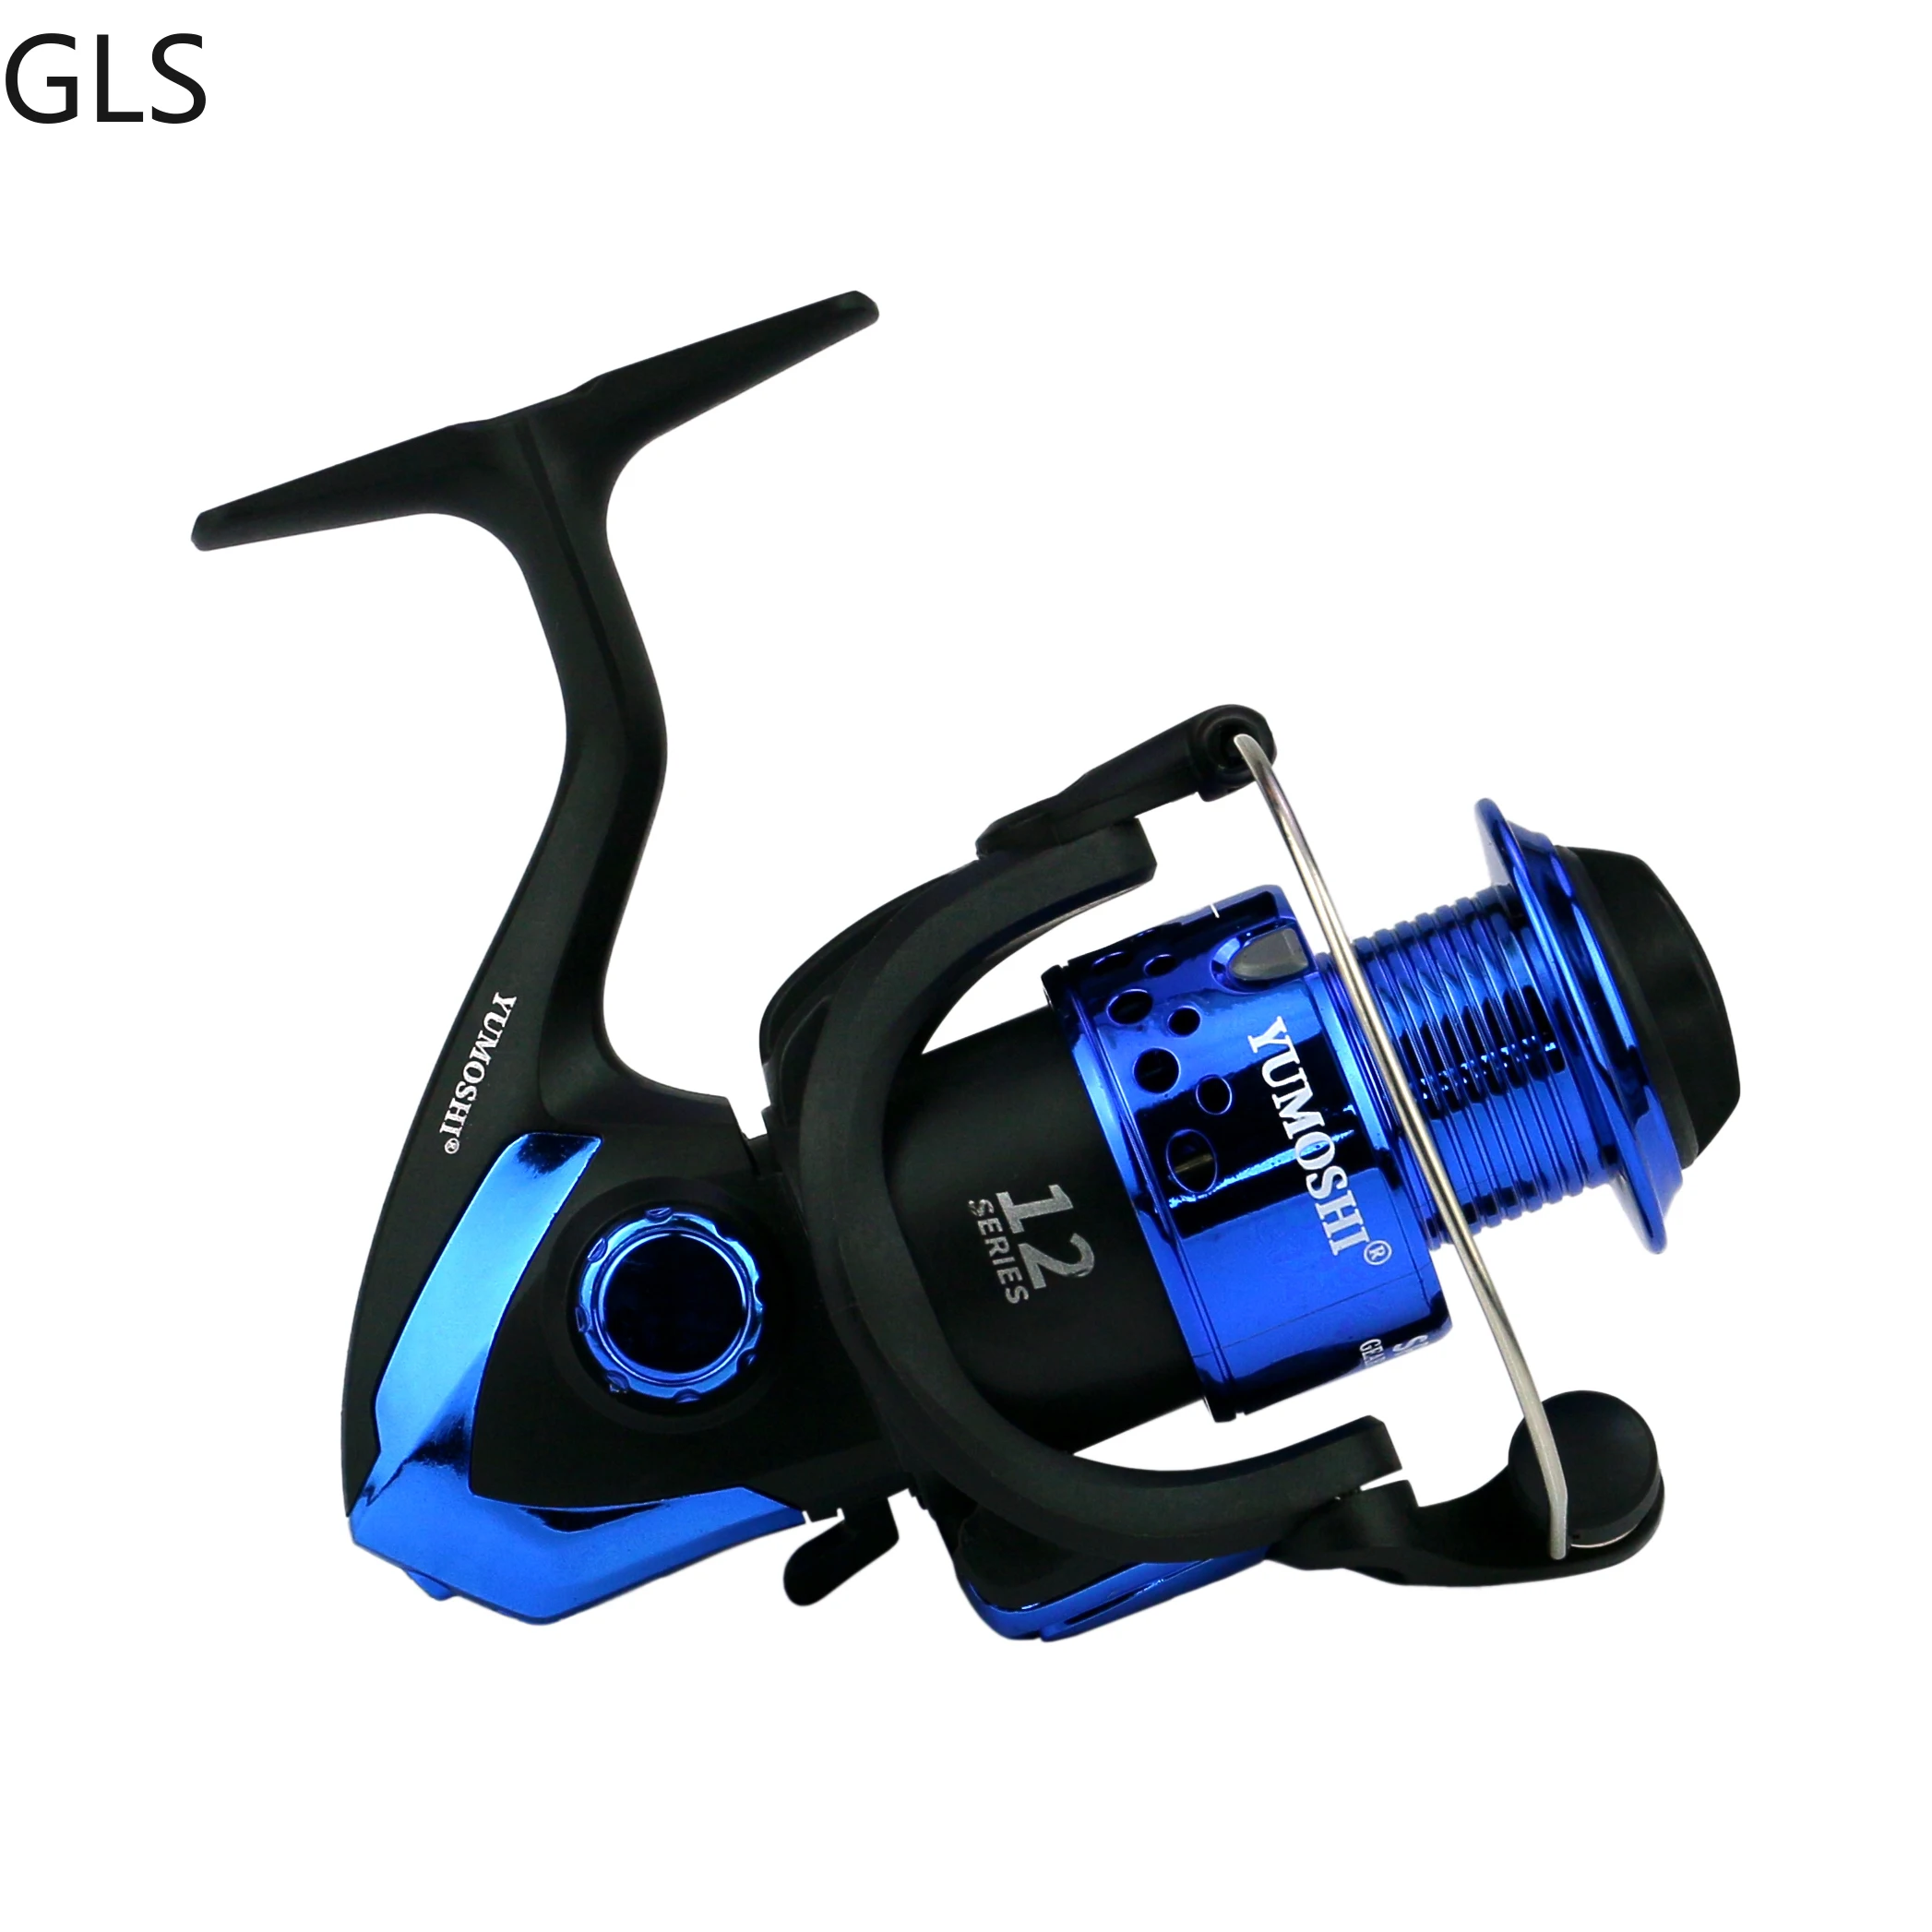 High Quality 5.5:1 Ultra Light Freshwater Carp Fishing Reel Tackle 3000-7000 Left/Right Interchangeable Spinning Wheel enlarge